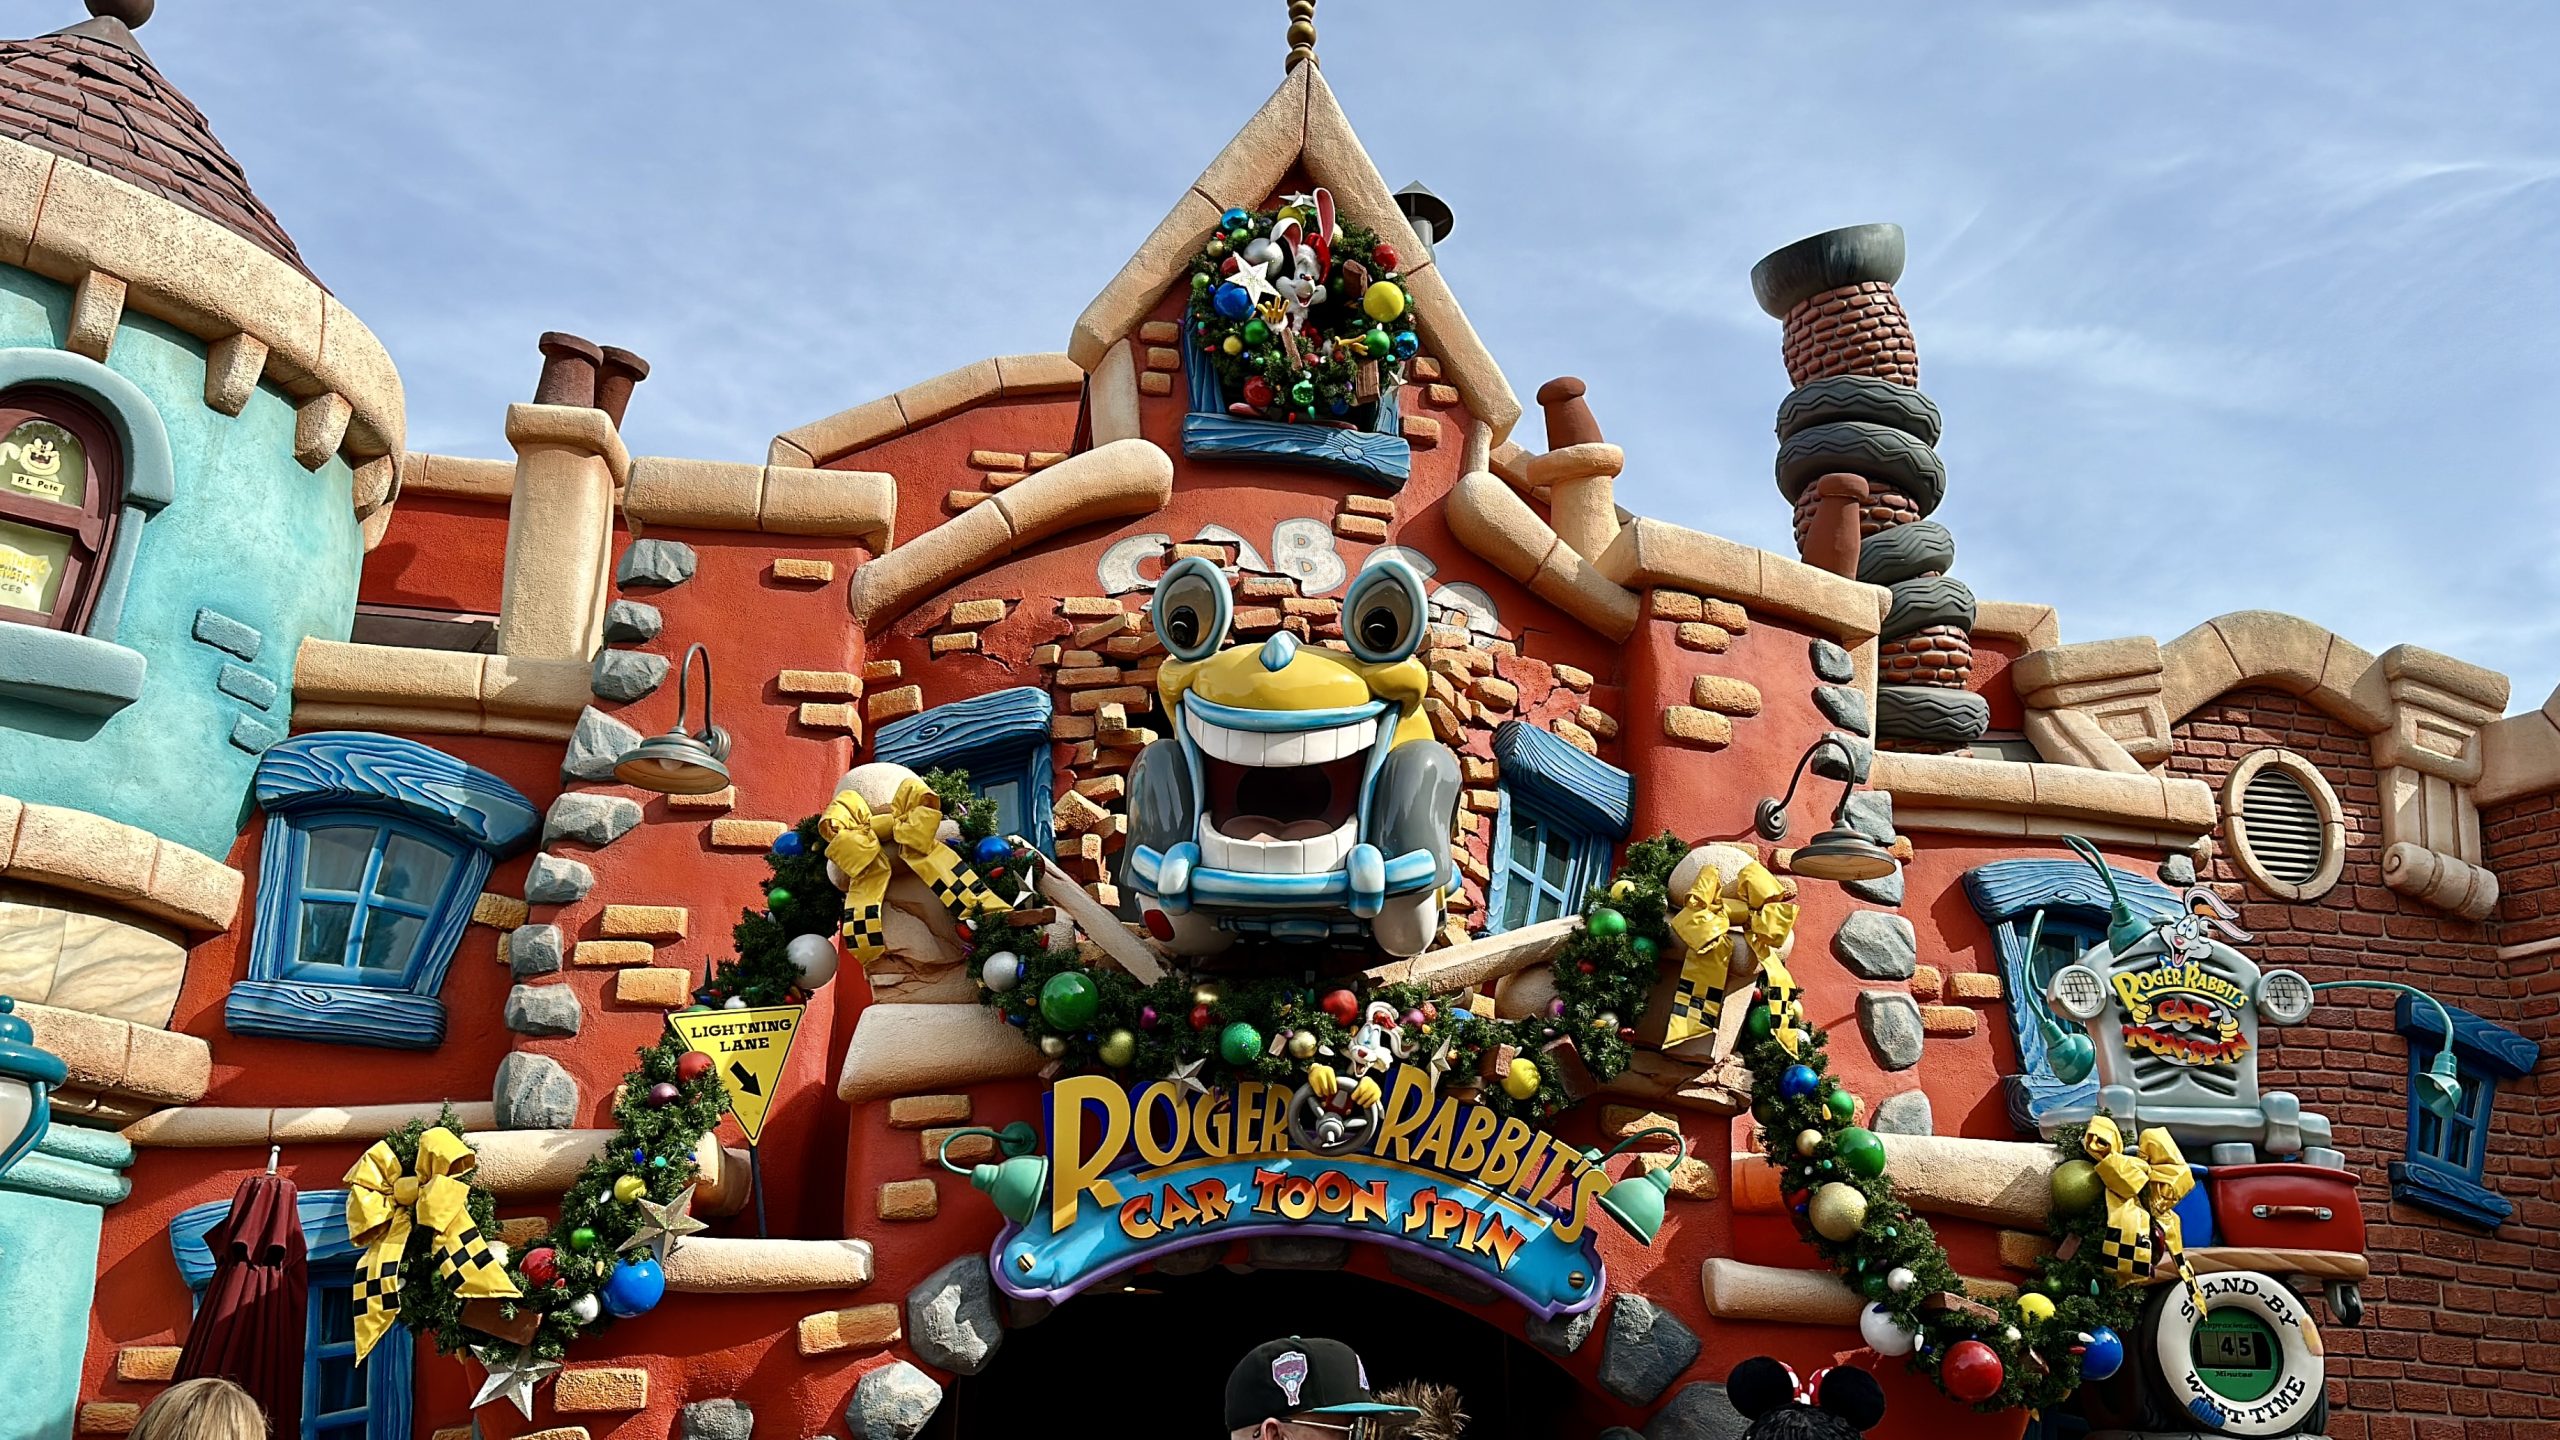 VIDEO TOUR: Mickey’s ToonTown Post Refurbishment and With Holiday Decorations